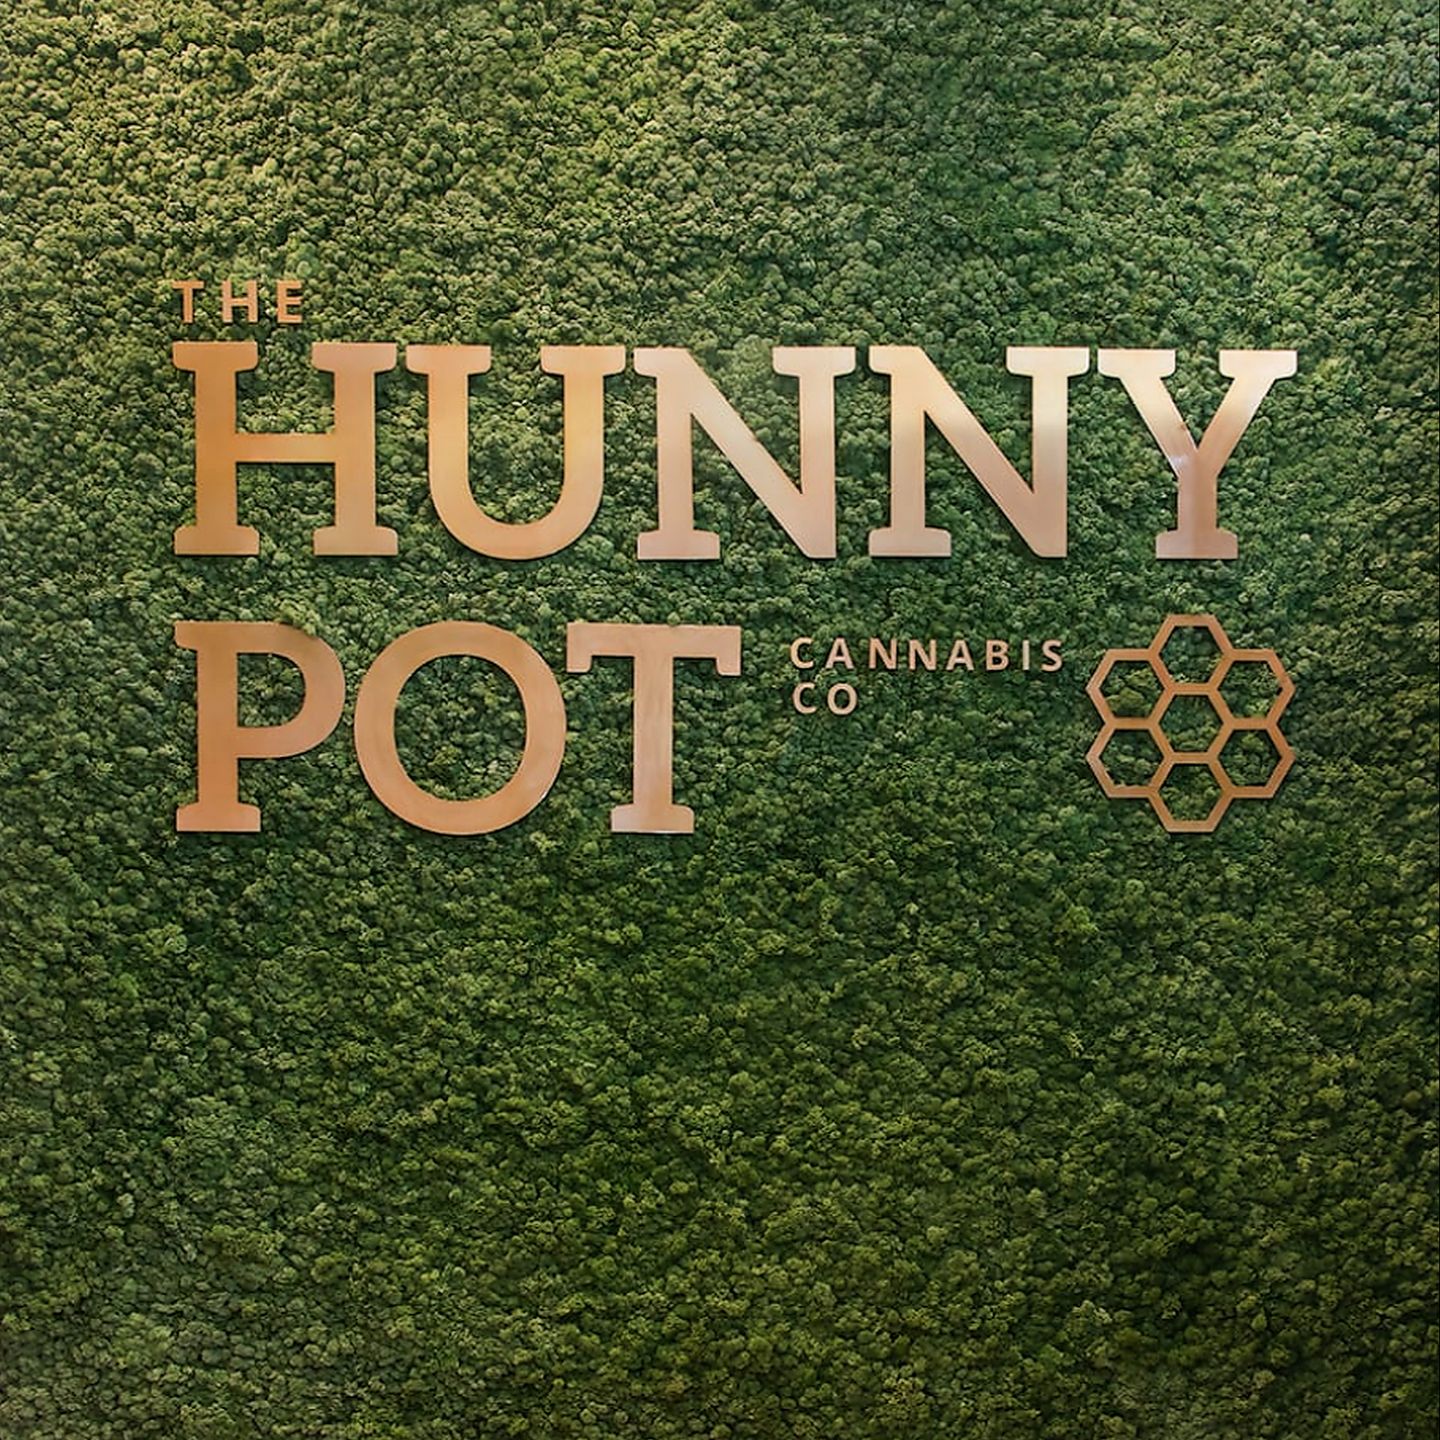 image feature The Hunny Pot Cannabis Co - Welland Ave